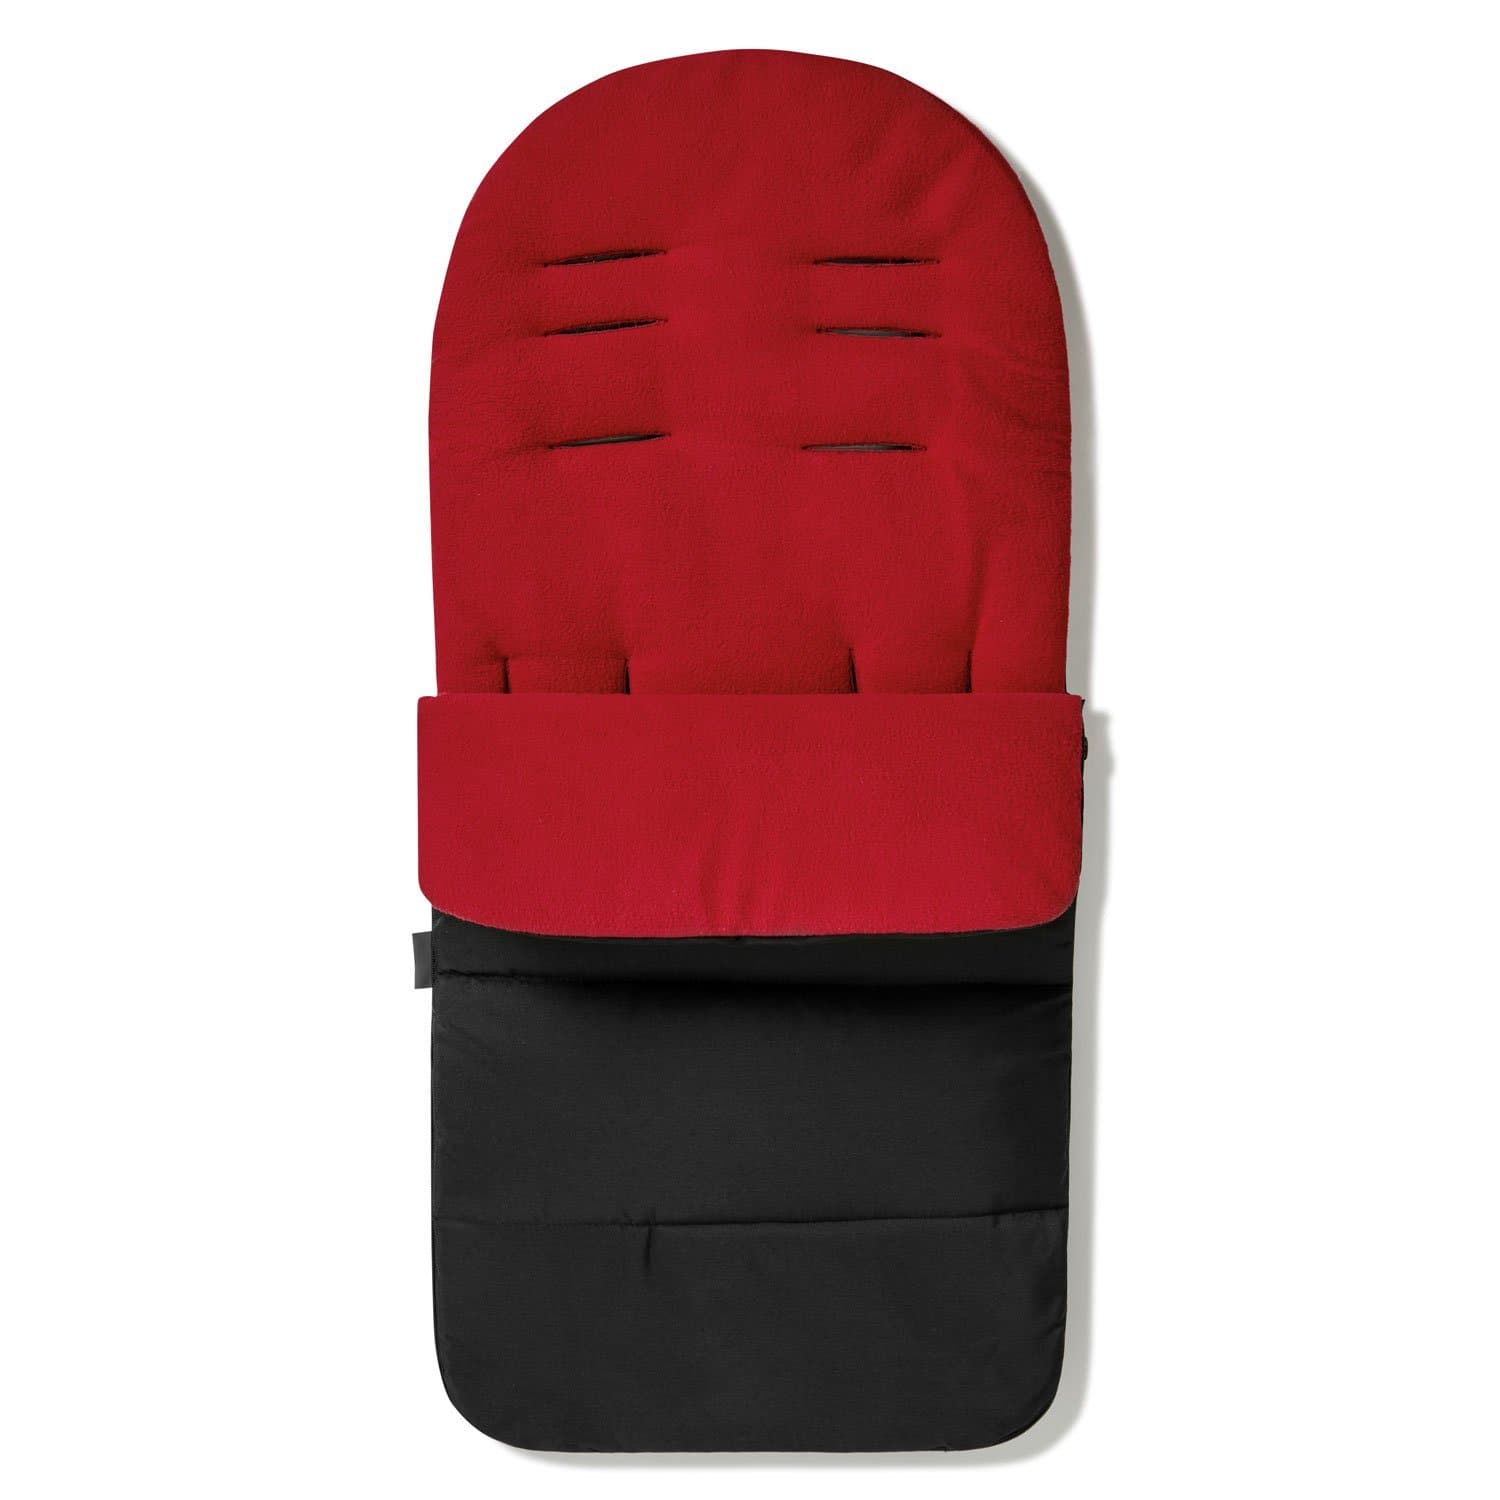 Premium Footmuff / Cosy Toes Compatible with Cybex - Fire Red / Fits All Models | For Your Little One